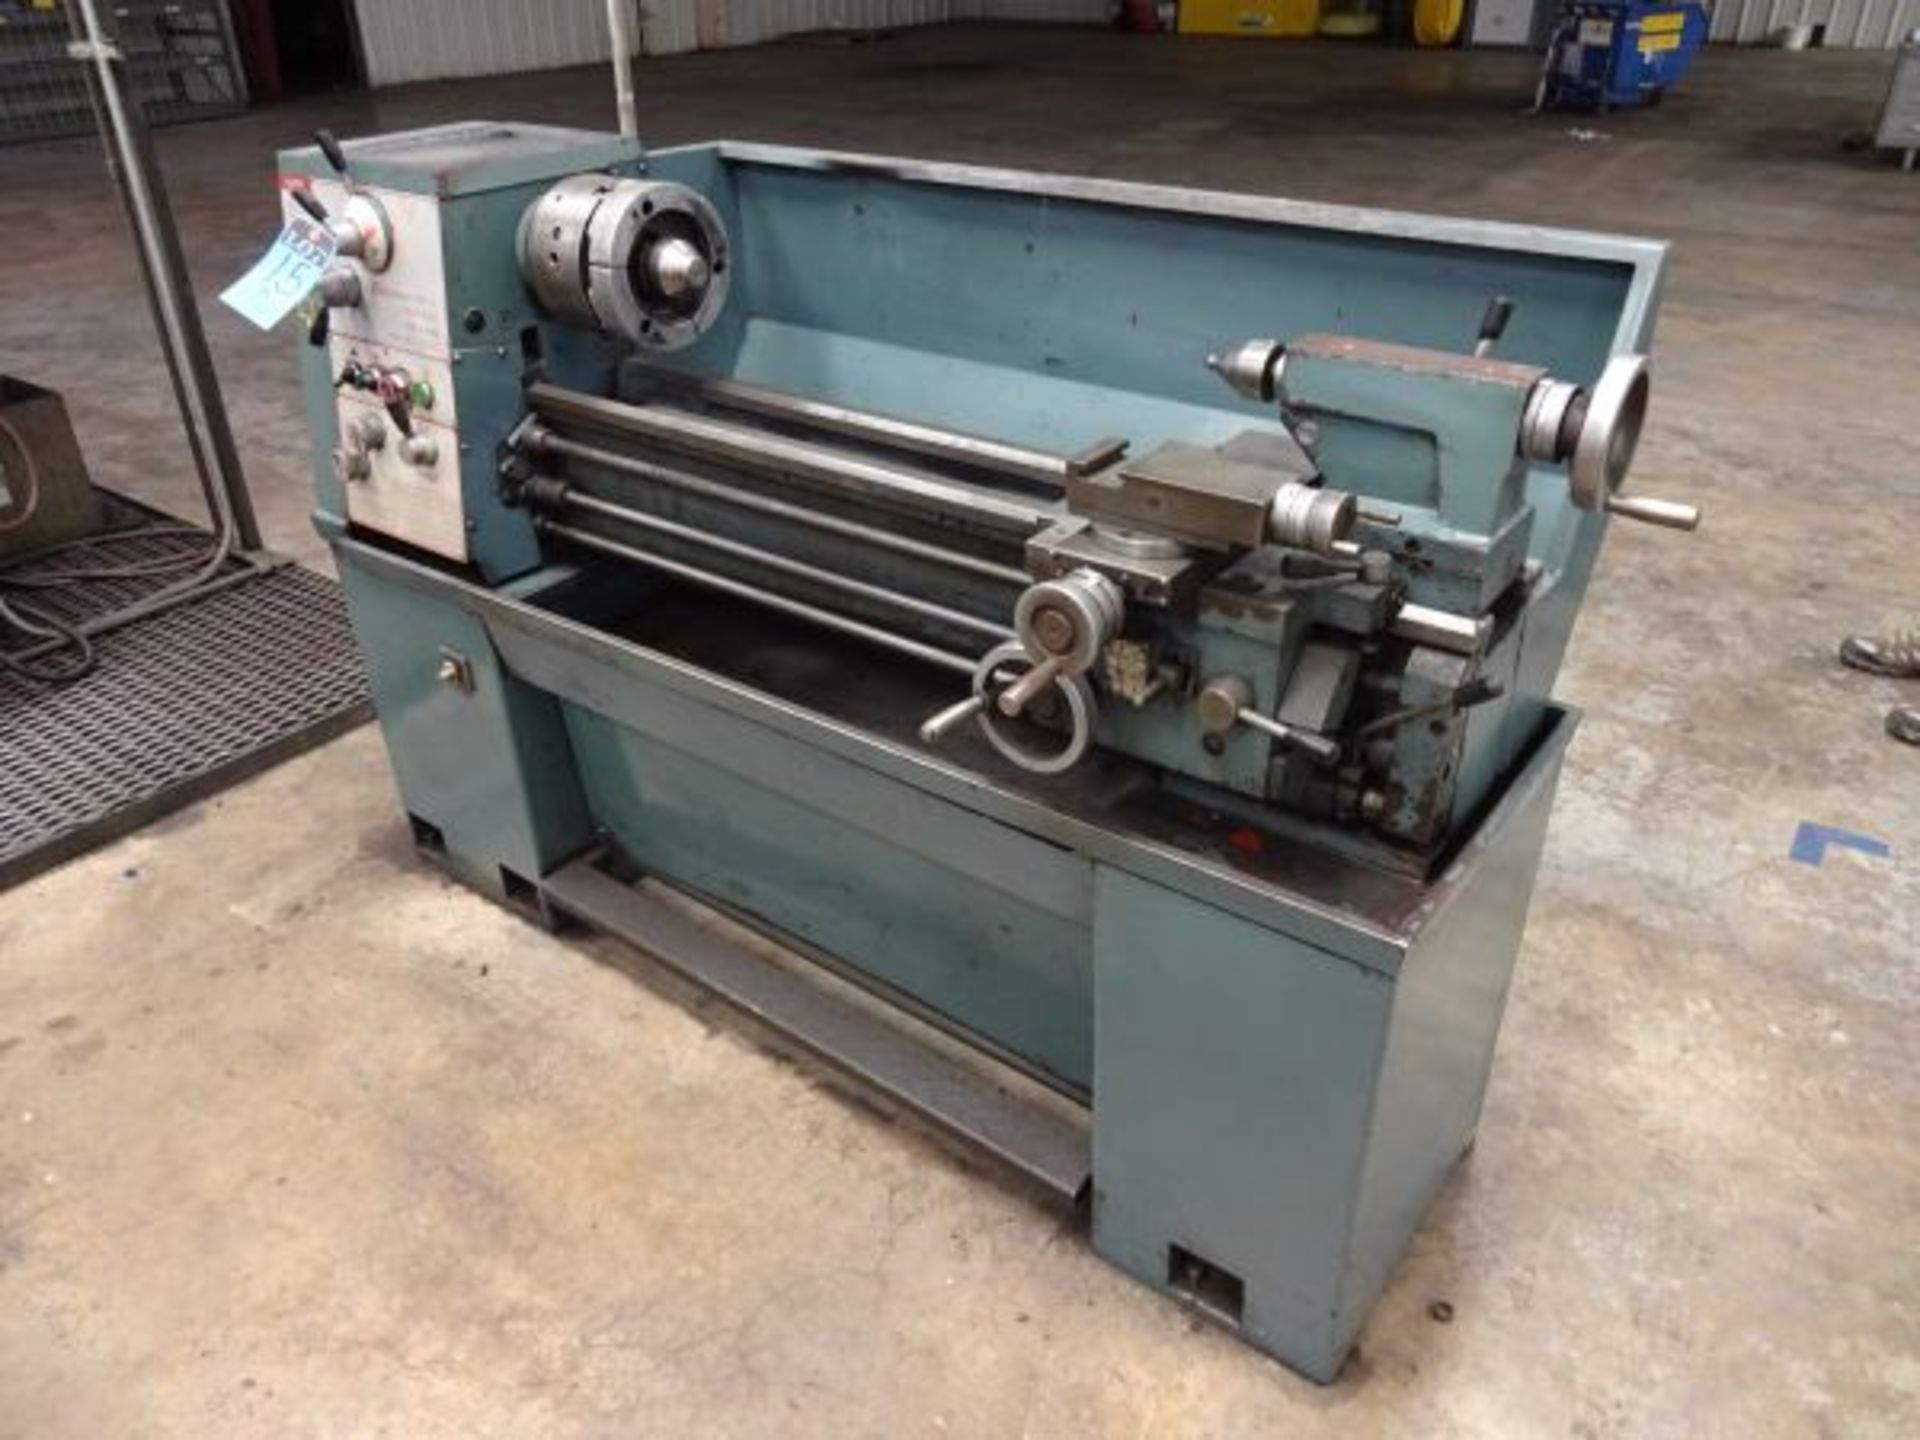 13" X 34" Enco Model 111-3320 Engine Lathe; S/N 940038, 8" 3-Jaw Chuck, 1" Spindle Bore, 45-1,800